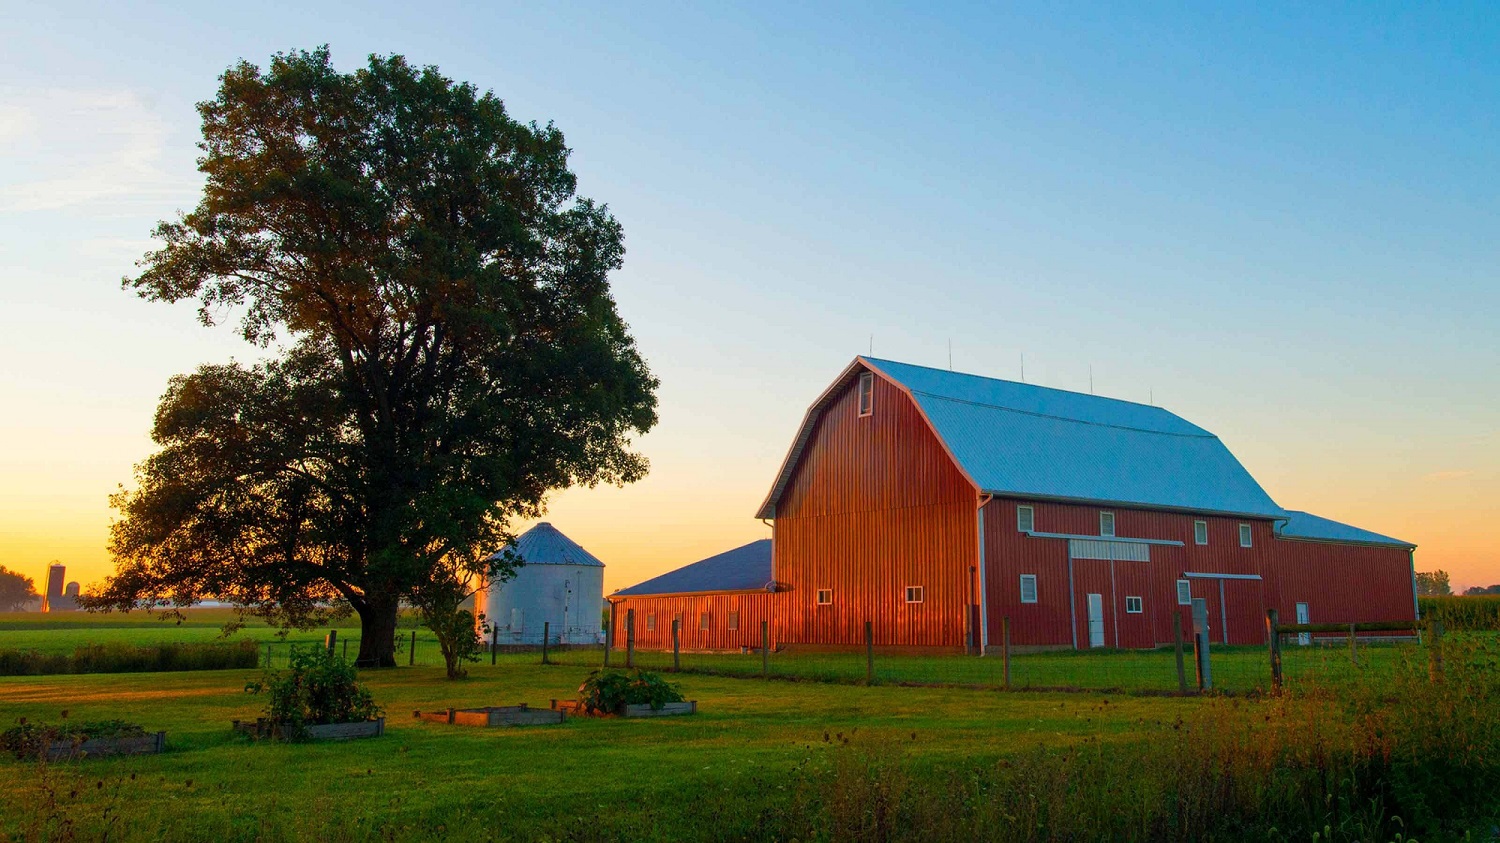 A large red barn sits on a vast field of rural farmland at sunset. A small white silo sits in the background, and a large tree is in the foreground.